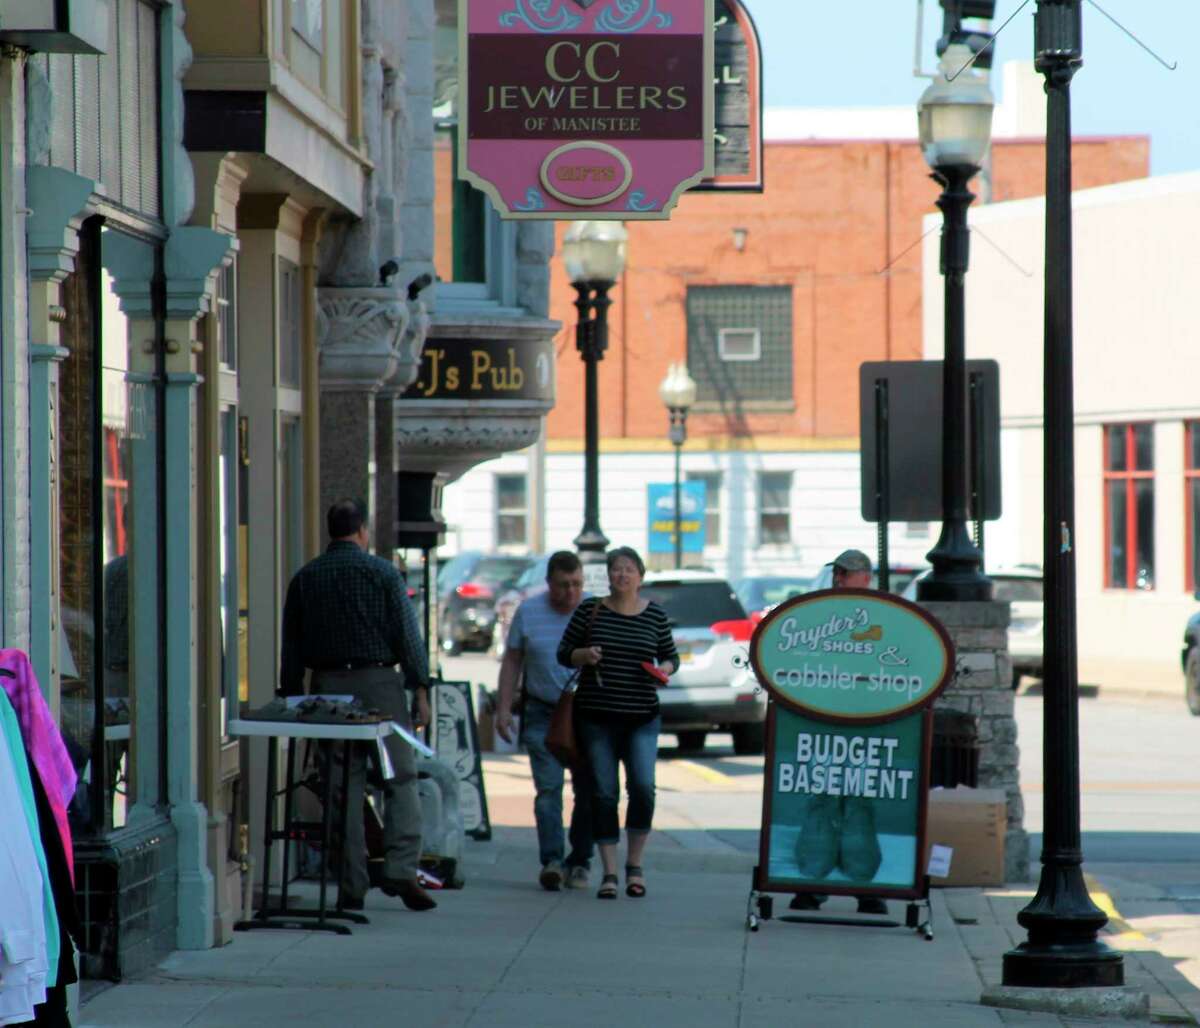 Manistee City Council wants the next city manager to be ready to handle downtown development, blight, housing issues and relationships between the city and surrounding townships. (File photo)